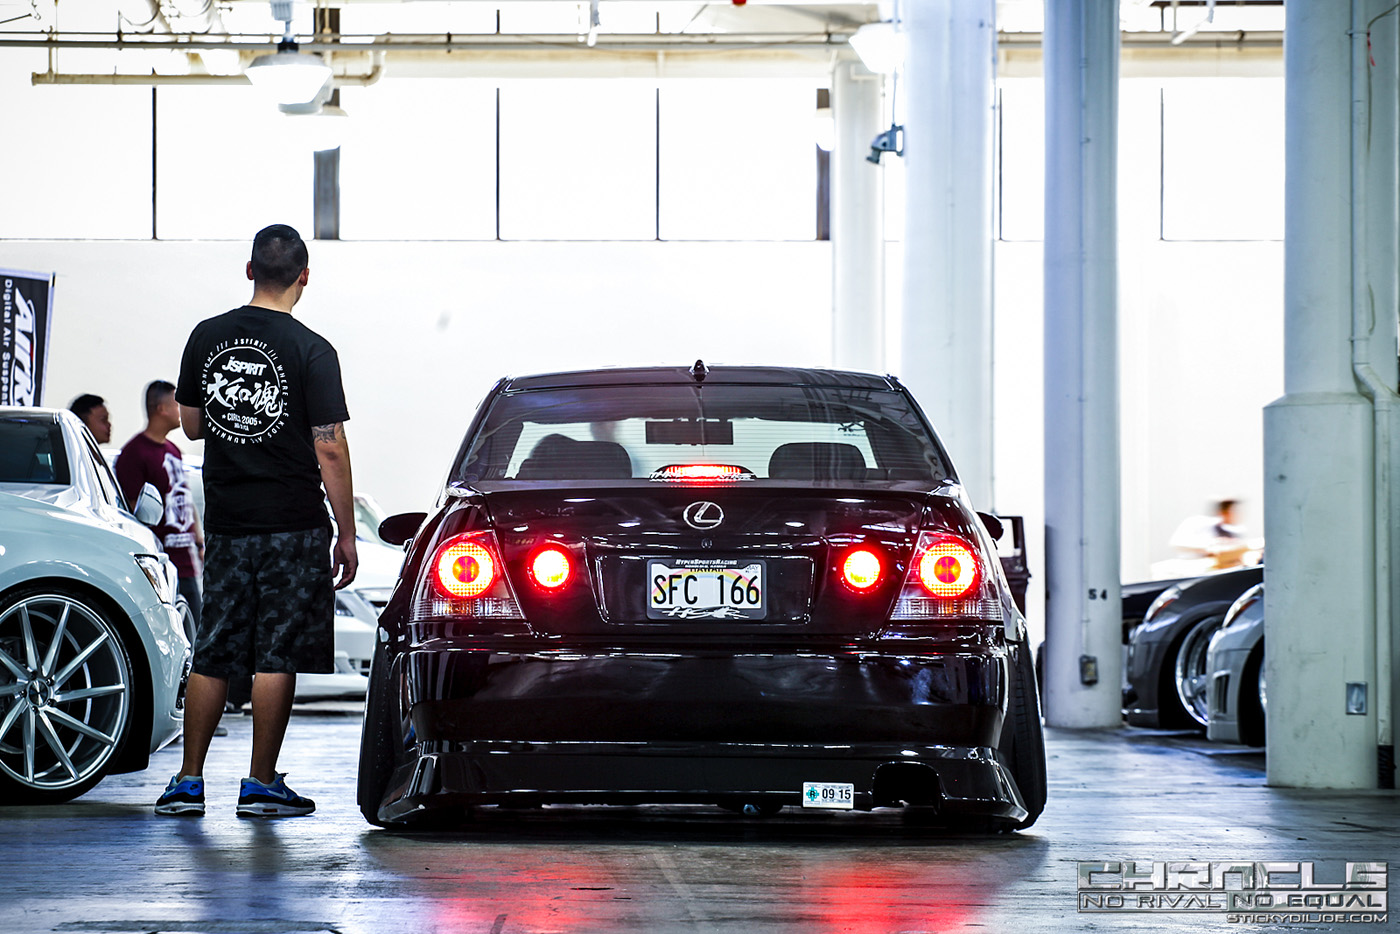 Wekfest Hawaii 2015 Coverage…Part 1 of 2…